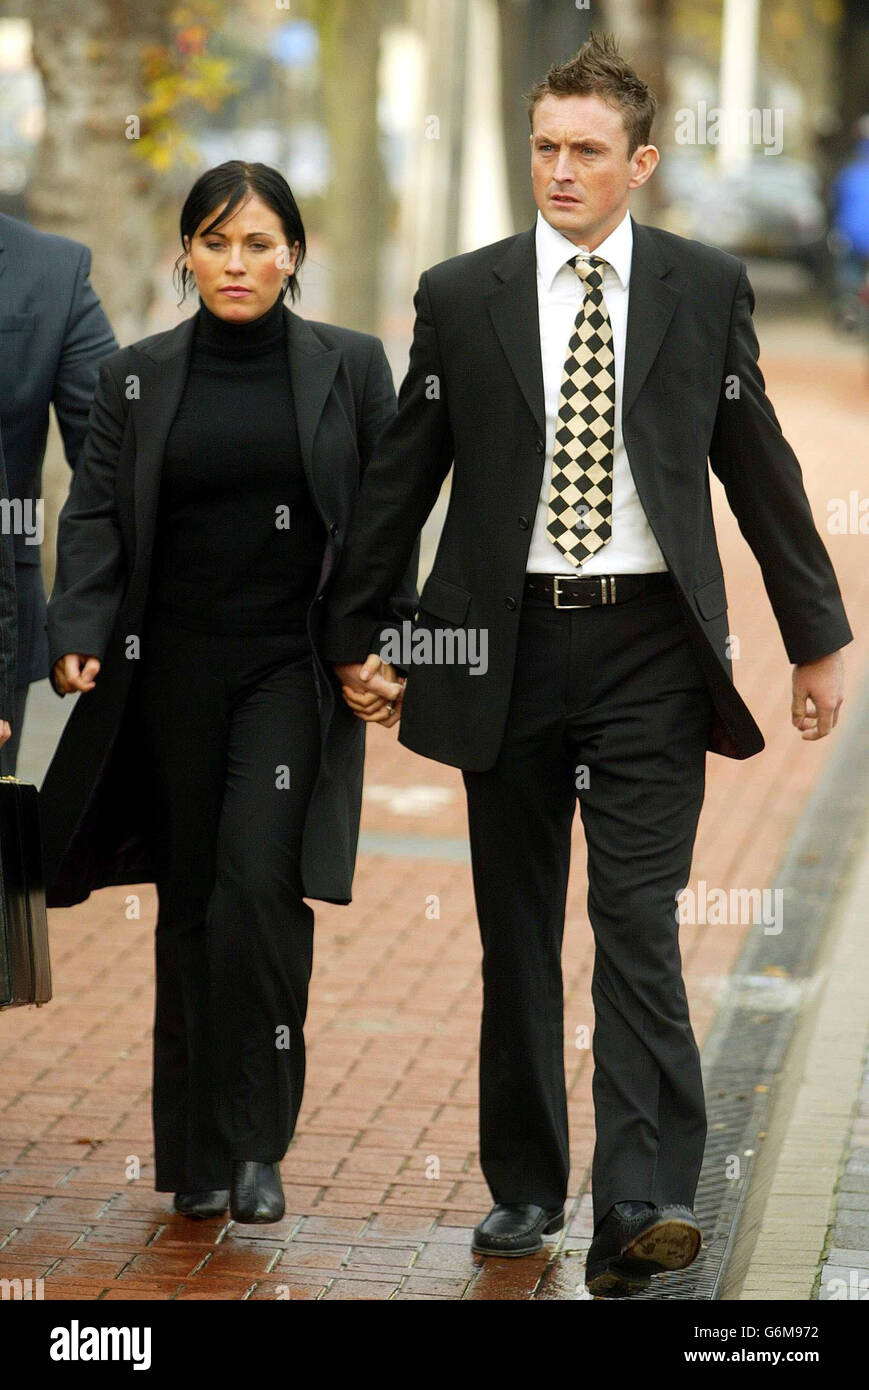 EastEnders actress Jessie Wallace, real name Karen Wallace accompanied by her boyfriend ex-police officer David Morgan, arriving at Southend magistrates in court accused of drink-driving. Wallace, who is in her early 30's plays the character Kat Slater in the BBC soap EastEnders. Stock Photo